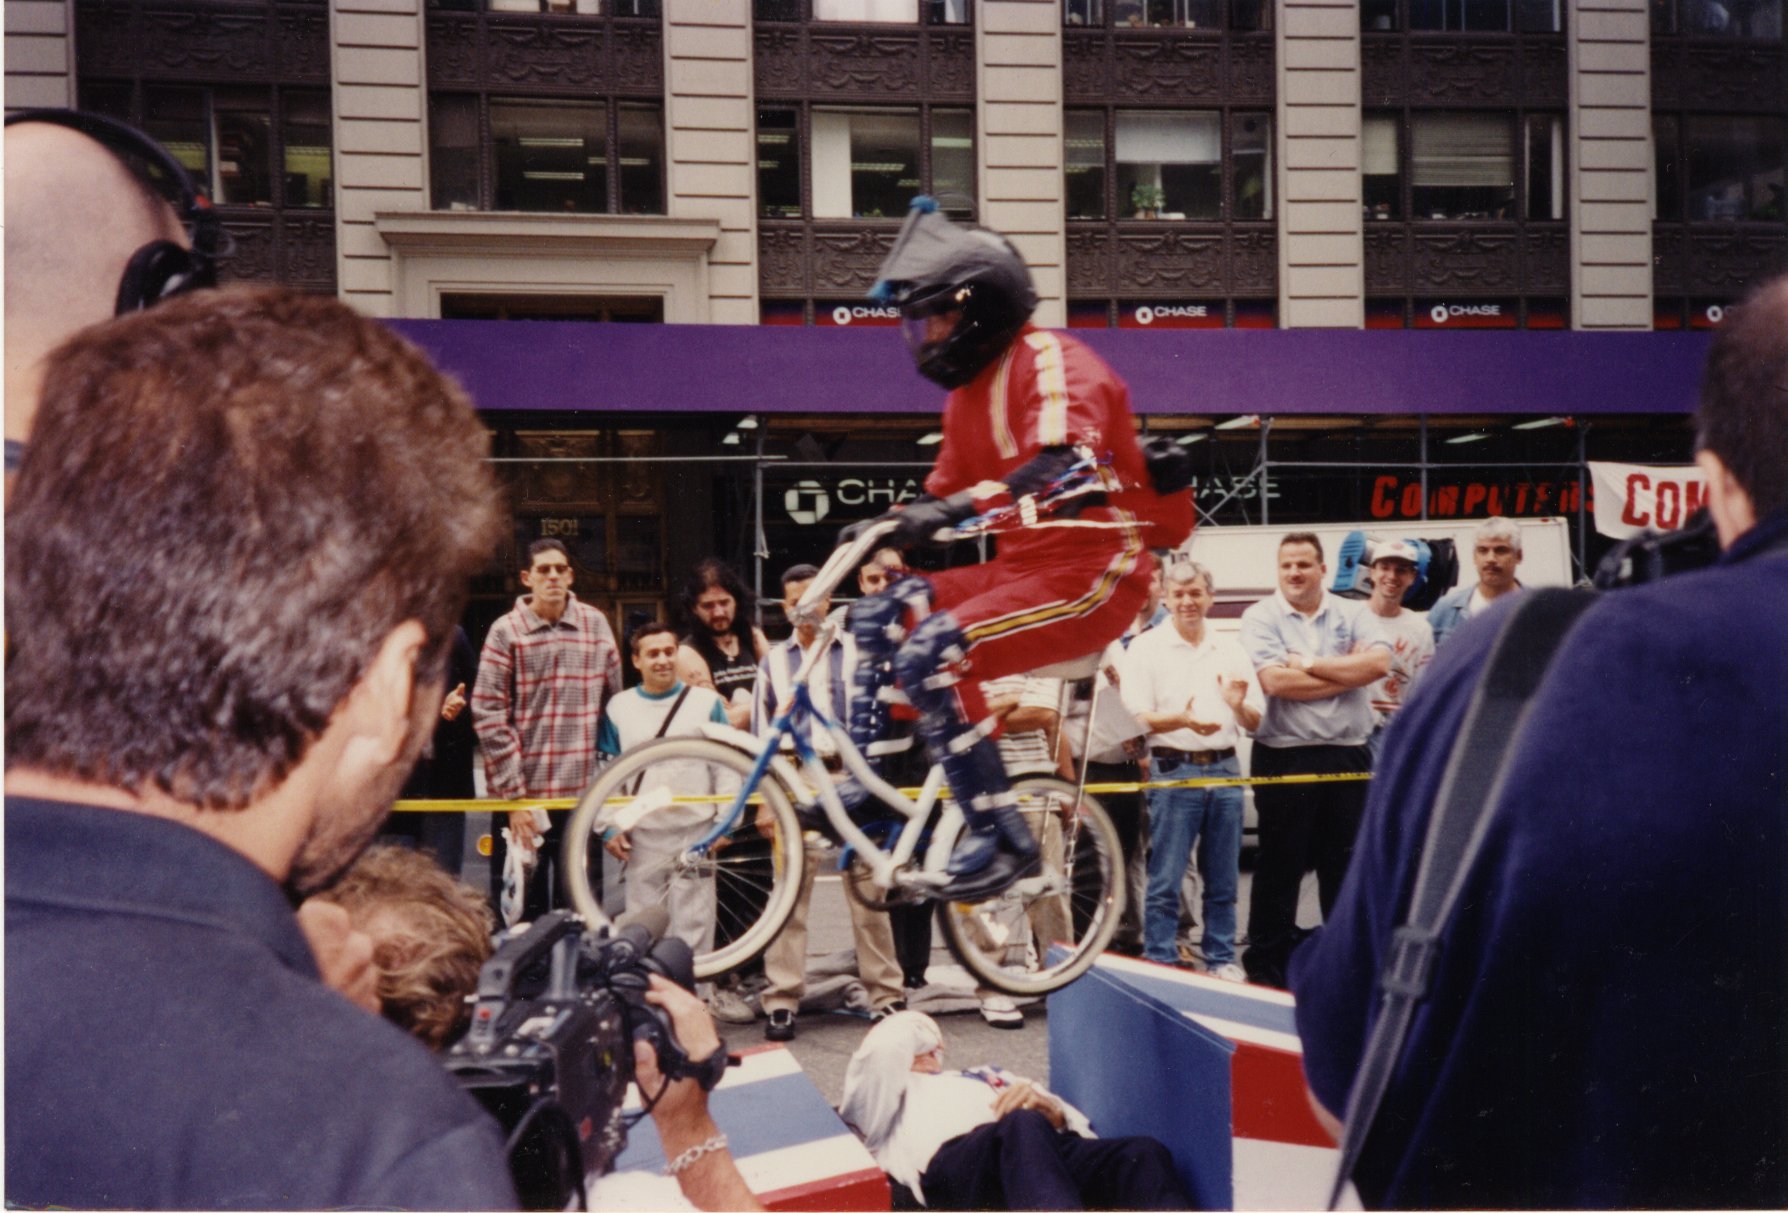 David Copeland performing a ramp to ramp bicycle jump over Evel Knievel in the middle of Times Square, NYC for Viva Variety on Comedy Central.